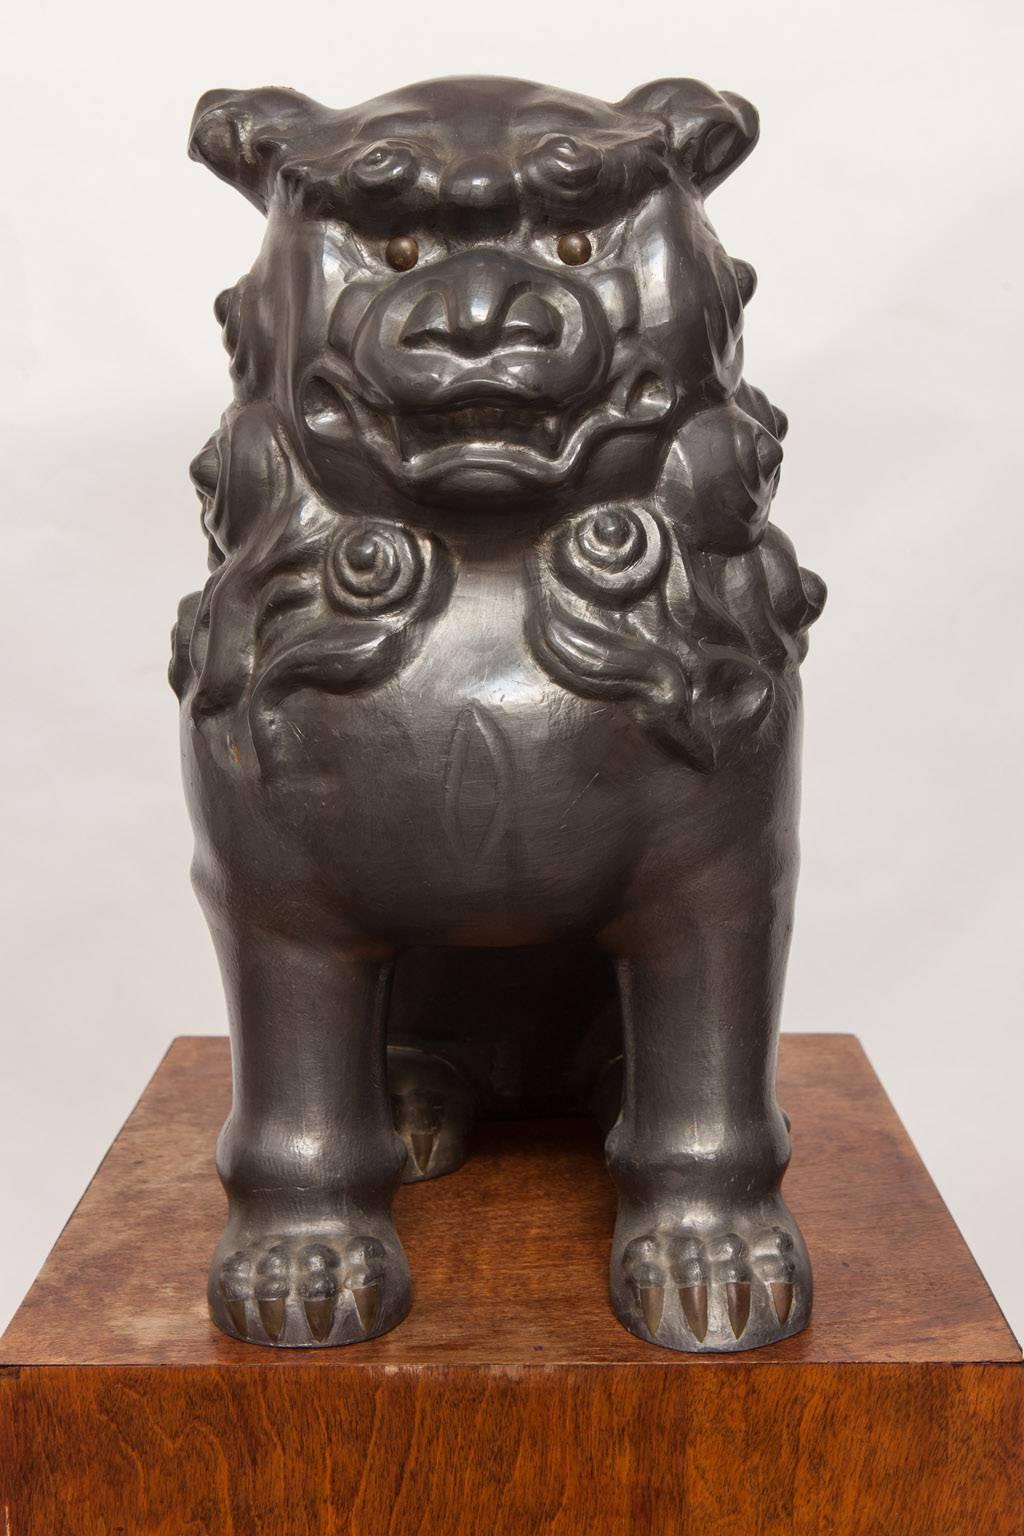 Rare pair of Chinese foo dogs or foo lions constructed from pewter. Very heavy and solid originally made to support a thick glass top for a coffee table. These temple guardians have a fierce look with bronze eyes and claws.